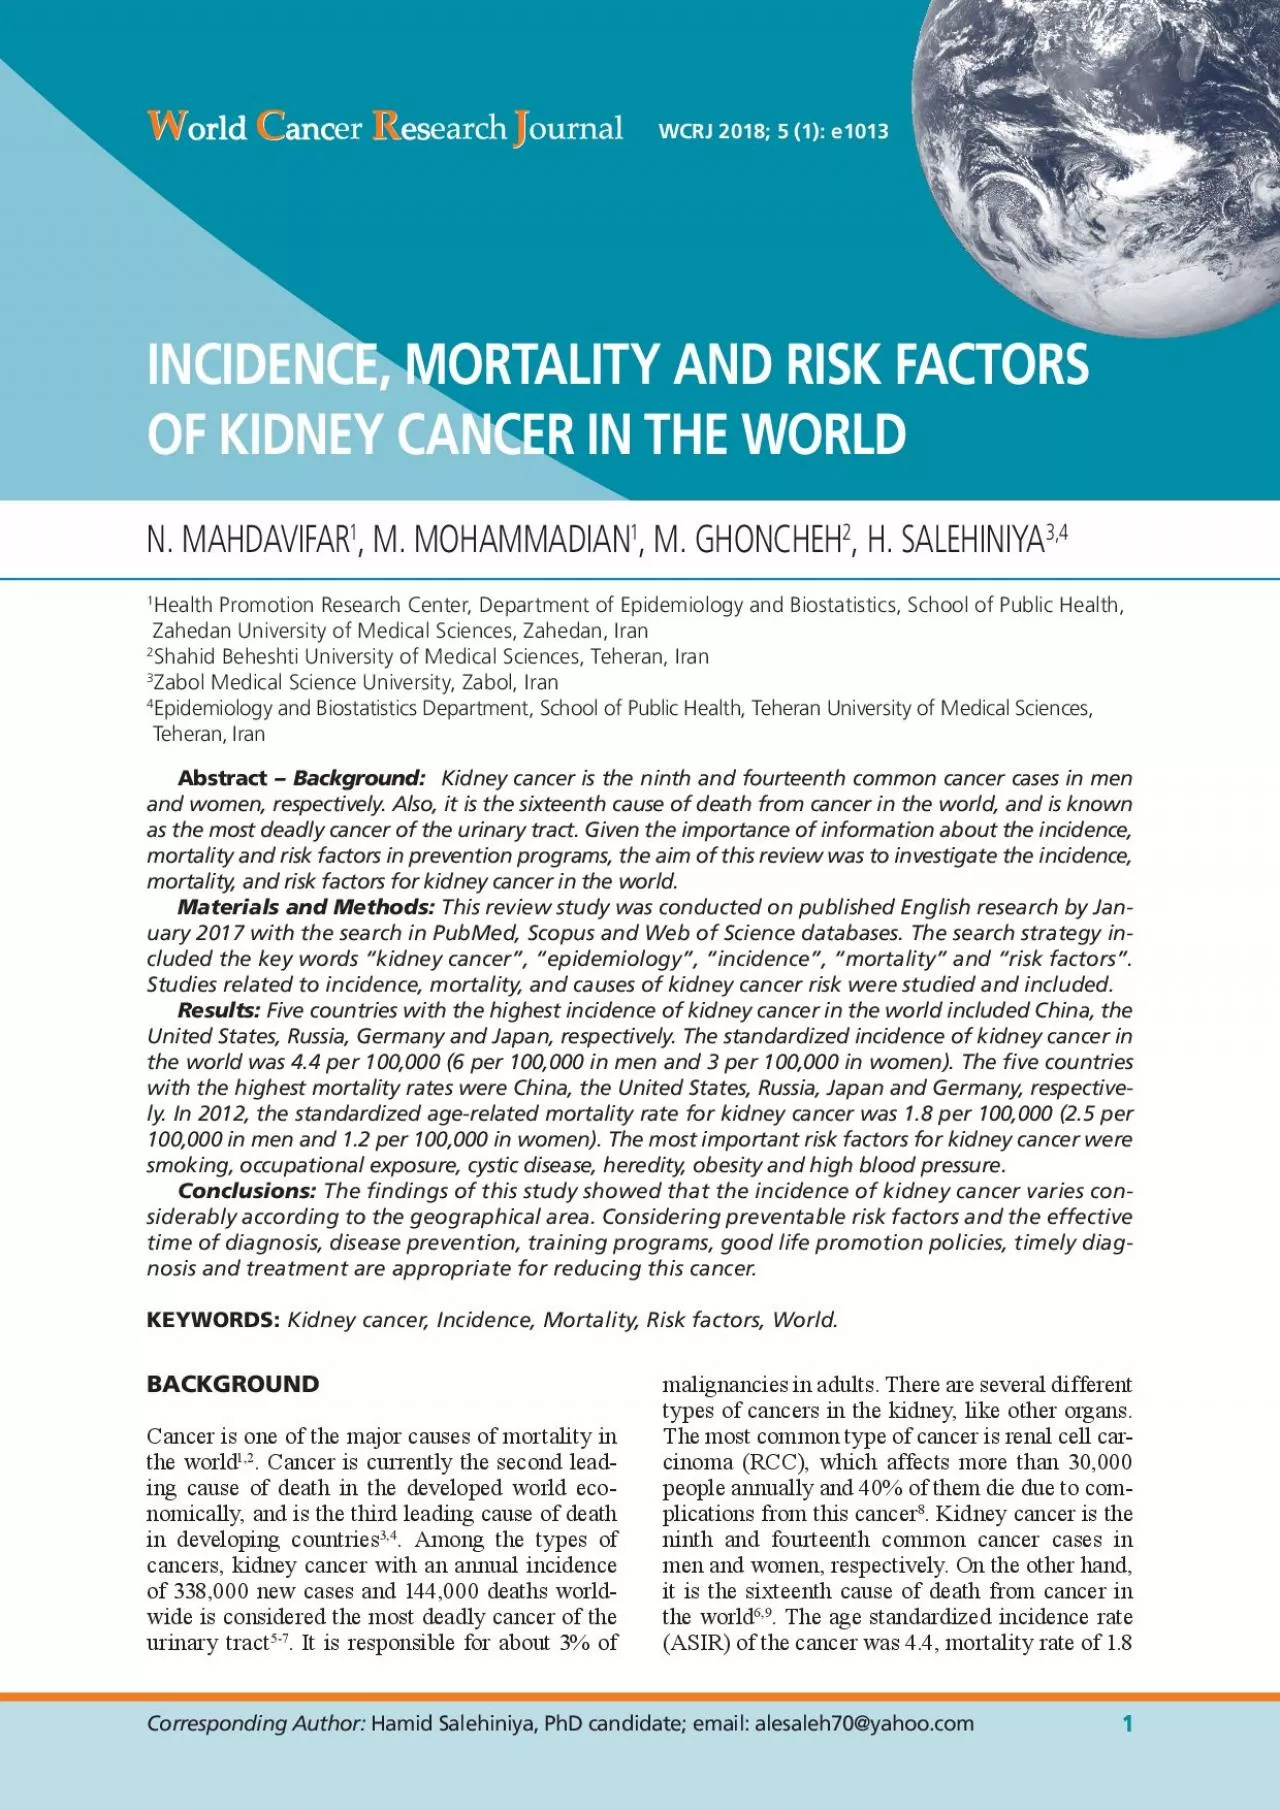 INCIDENCE MORTALITY AND RISK FACTORSOF KIDNEY CANCER IN THE WORLDBACK